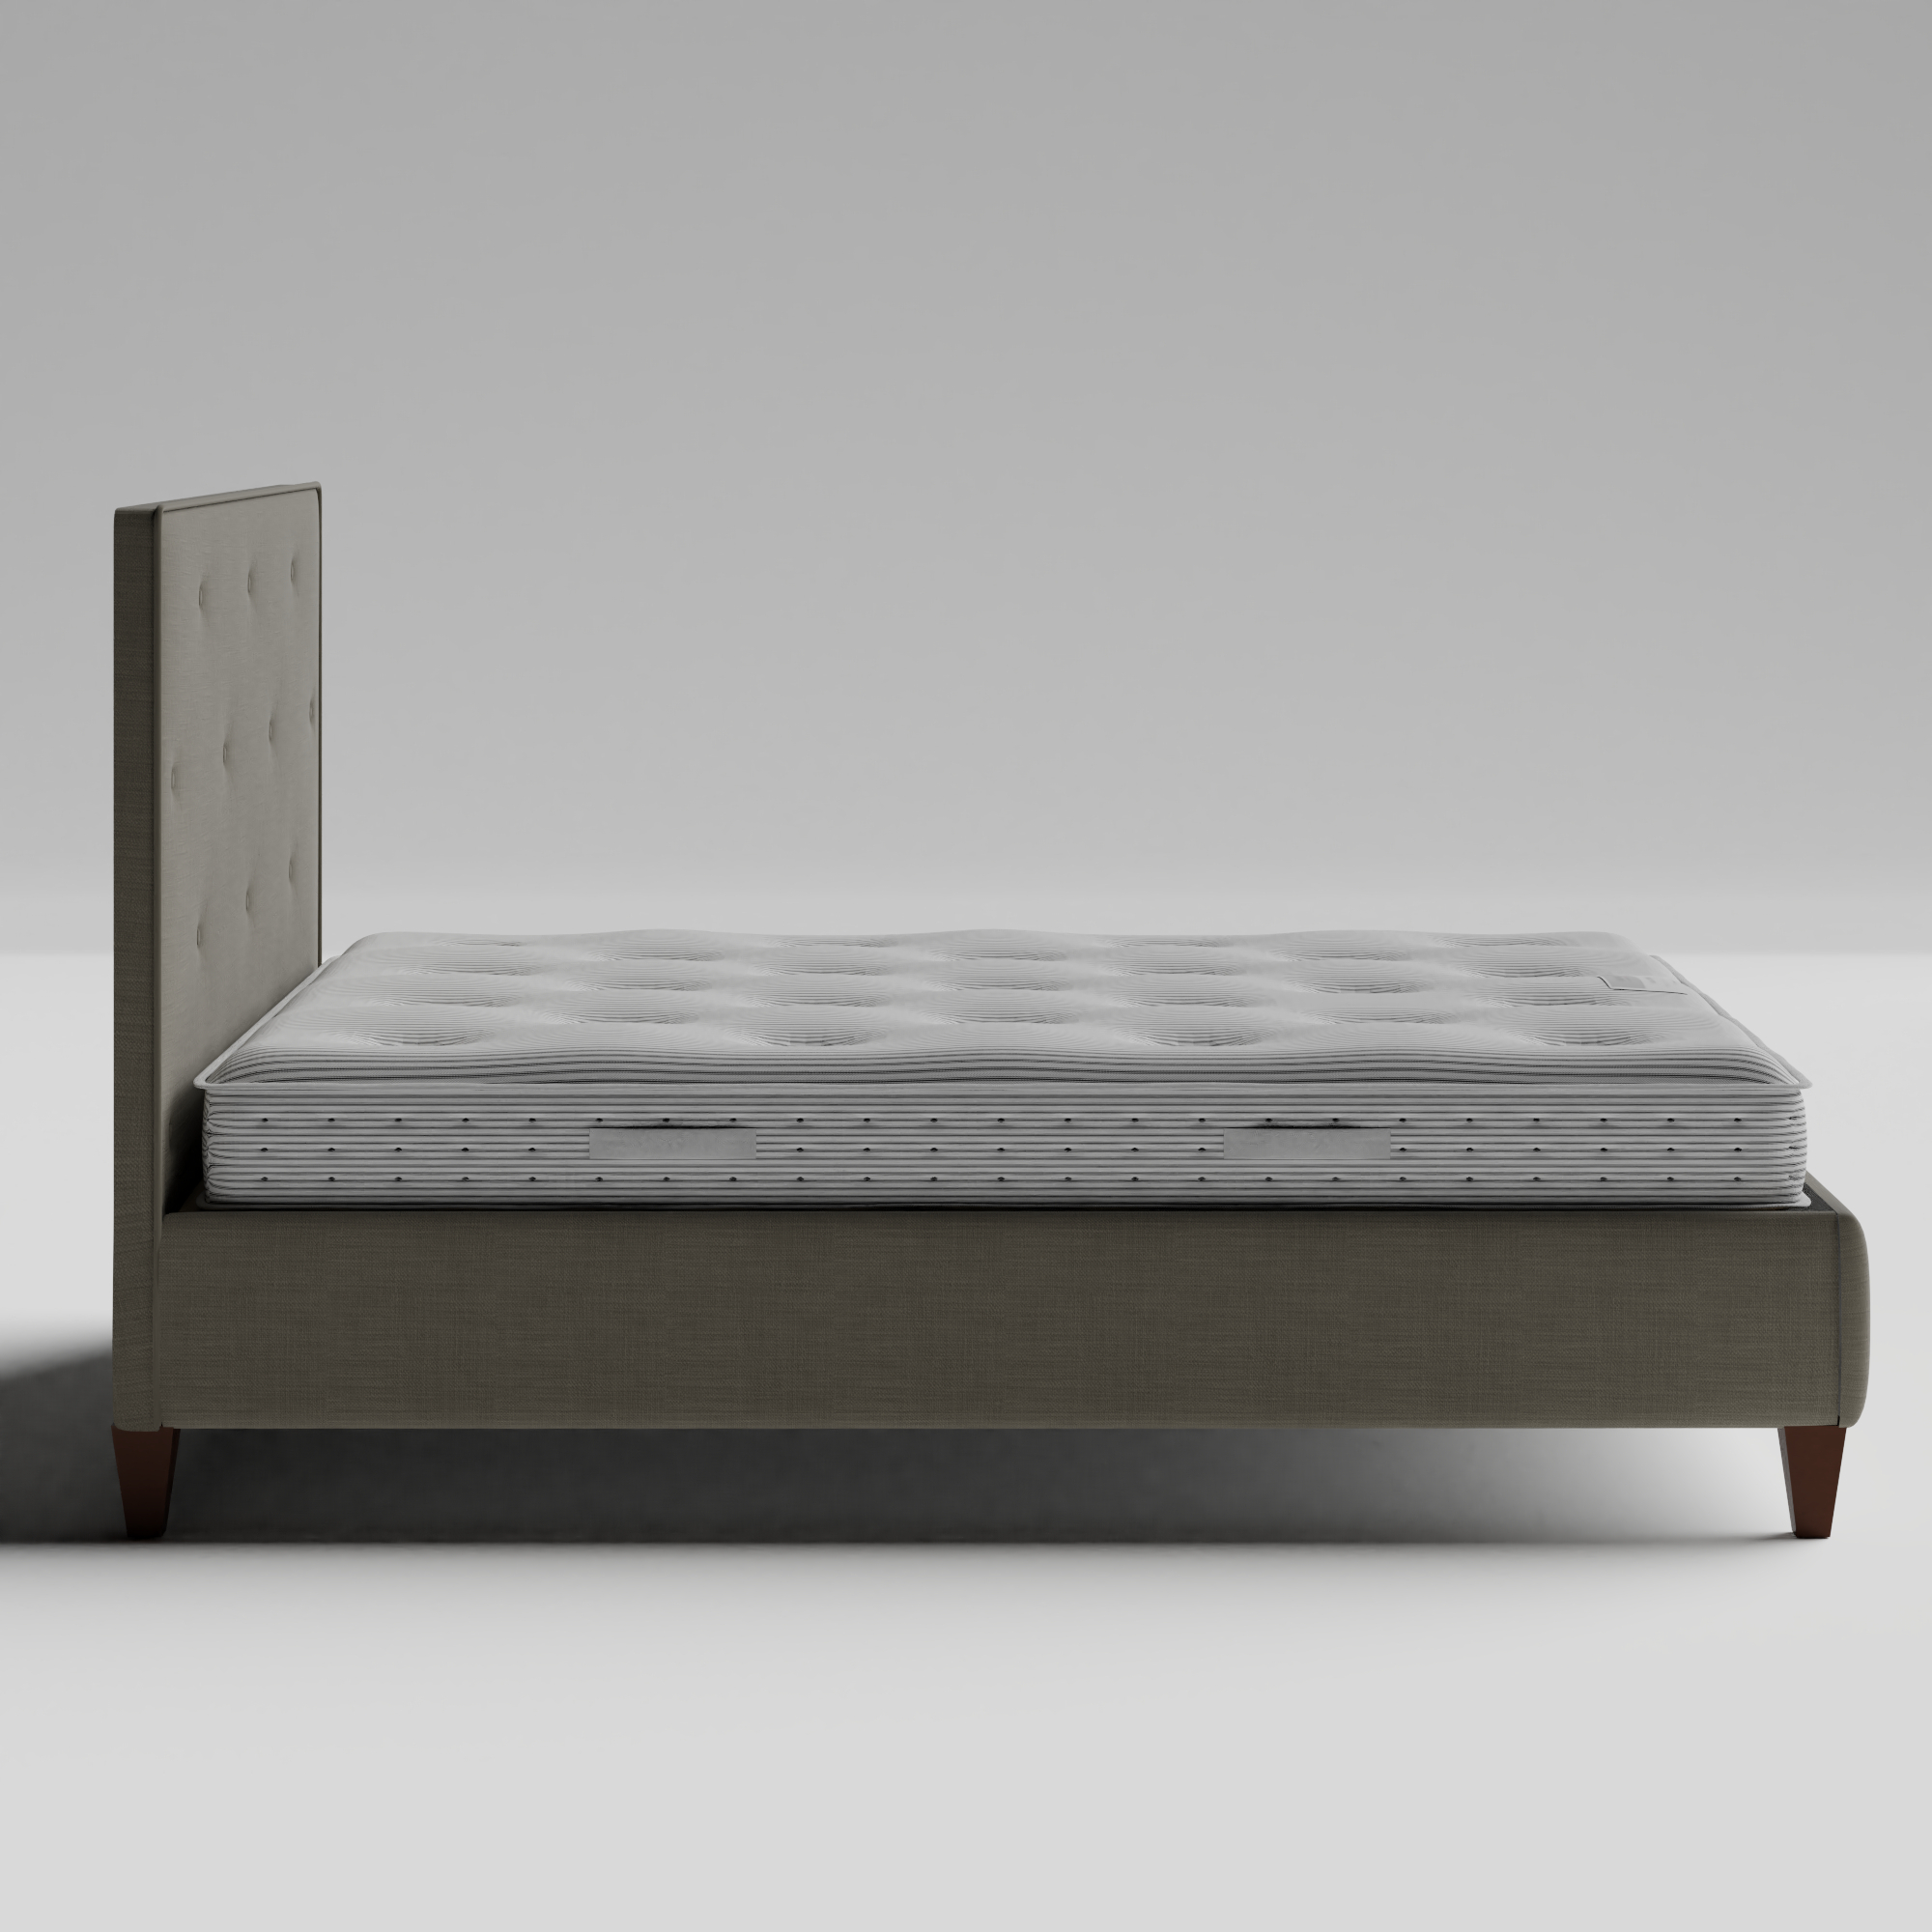 Yushan Buttoned Diagonal upholstered bed in grey fabric with Juno mattress